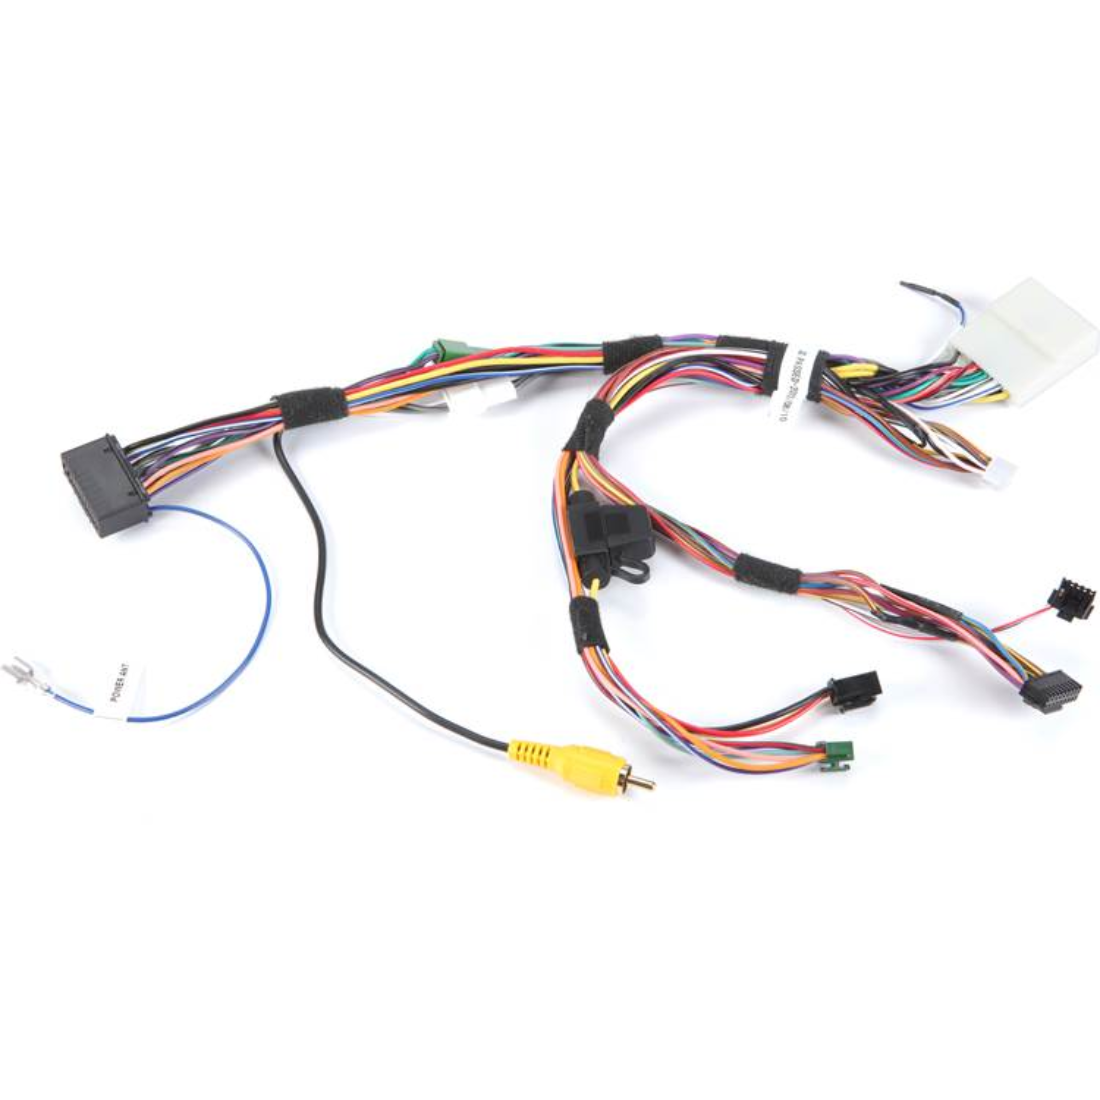 iDatalink HRN-HRR-NI2 Radio Replacement Harness for Select 2017-20 Nissan